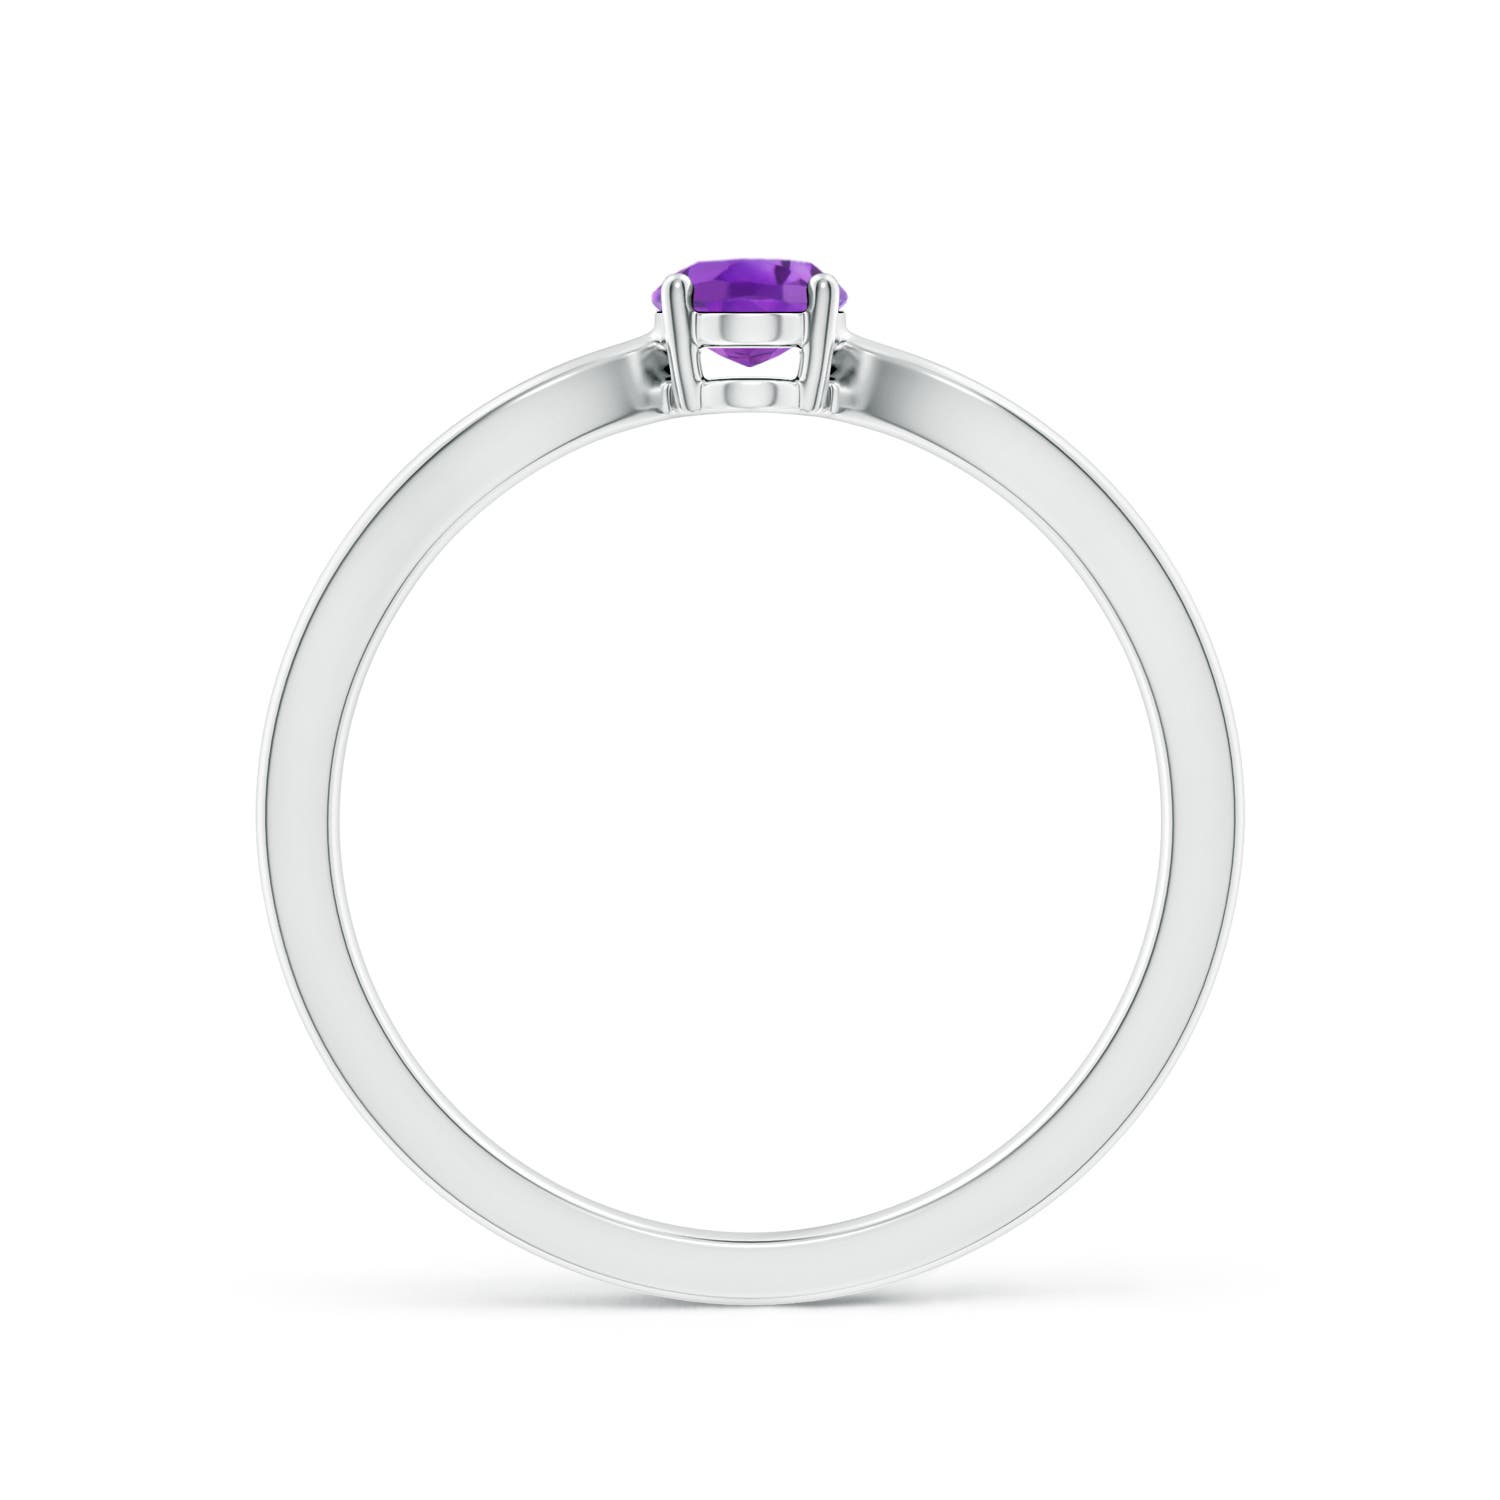 AA - Amethyst / 0.4 CT / 14 KT White Gold